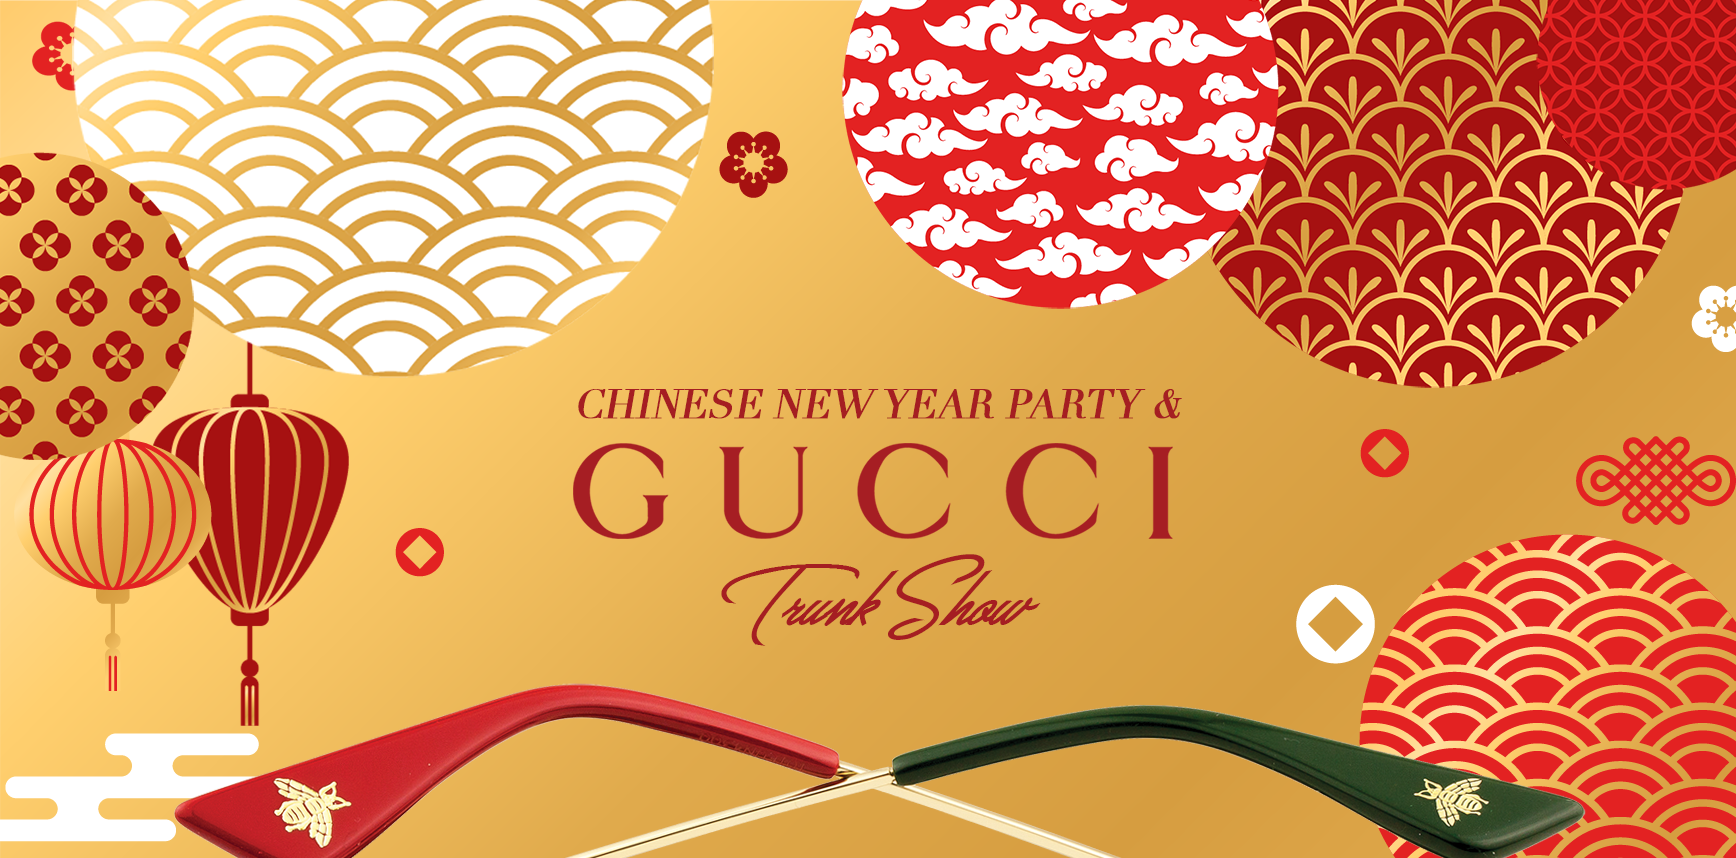 støn redaktionelle Udvinding Chinese New Year Party & Gucci Trunk Show | Mott Optical Group